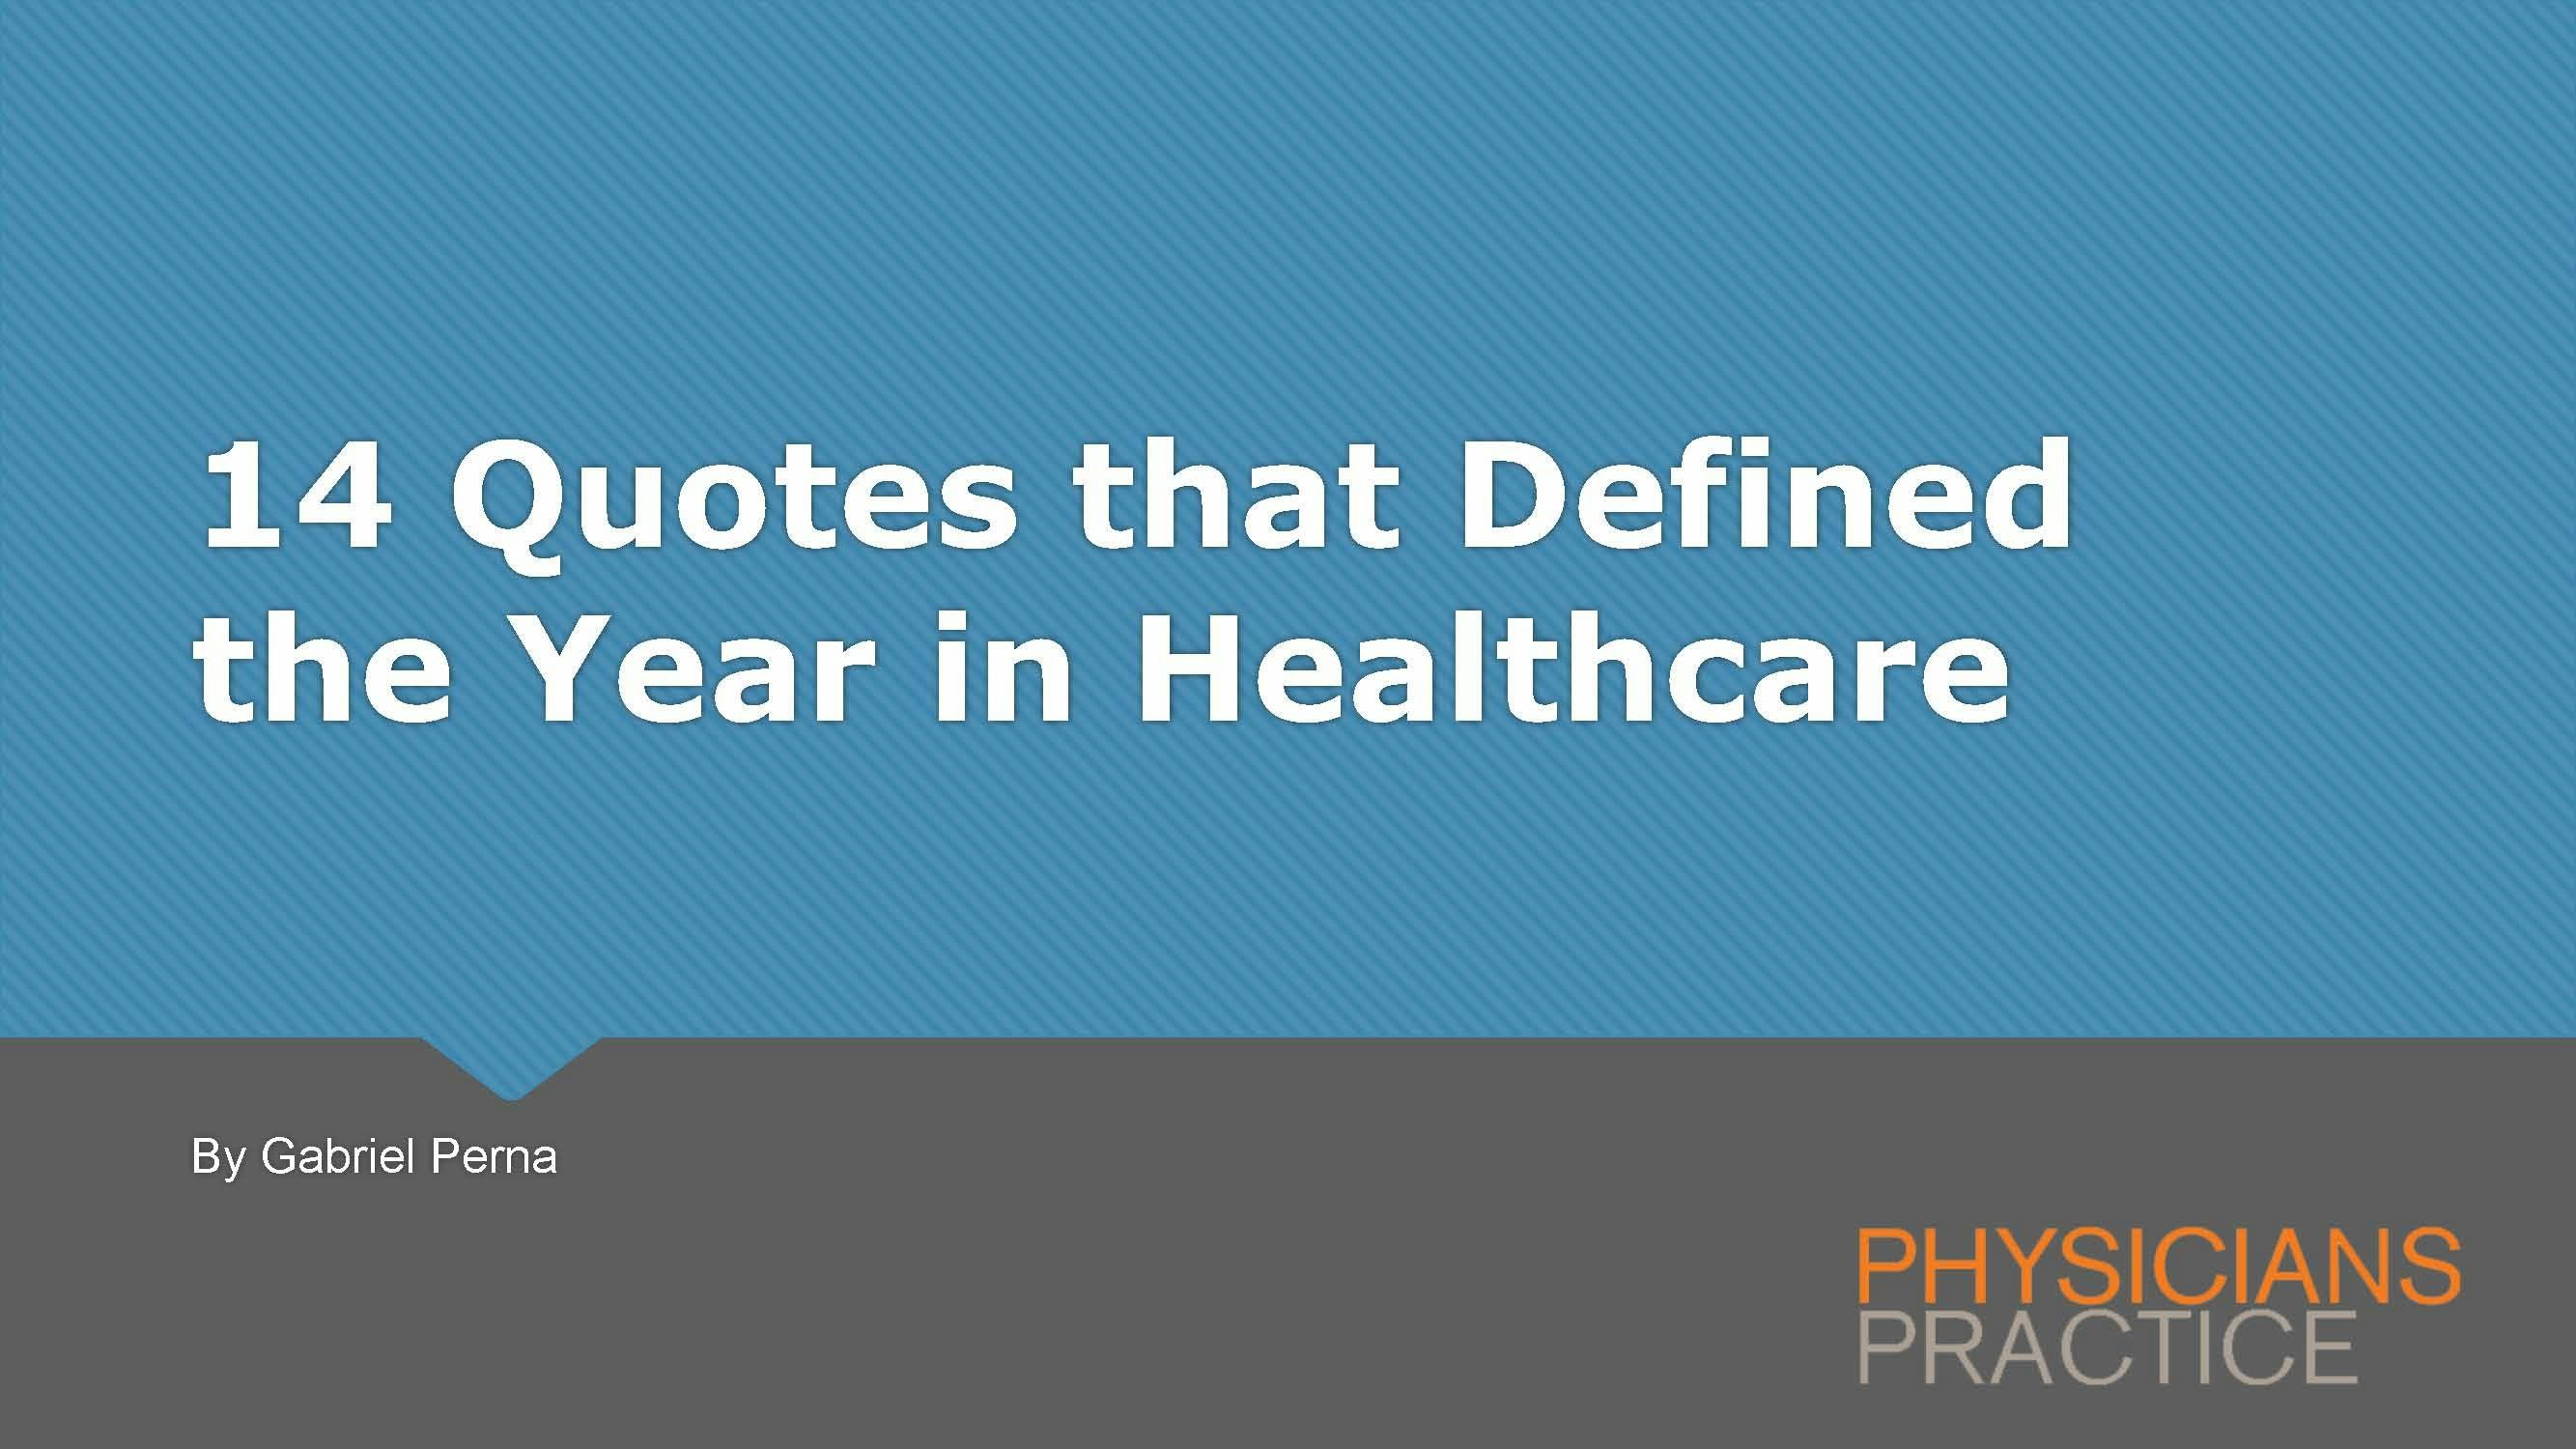 14 Quotes that Defined the Year in Healthcare